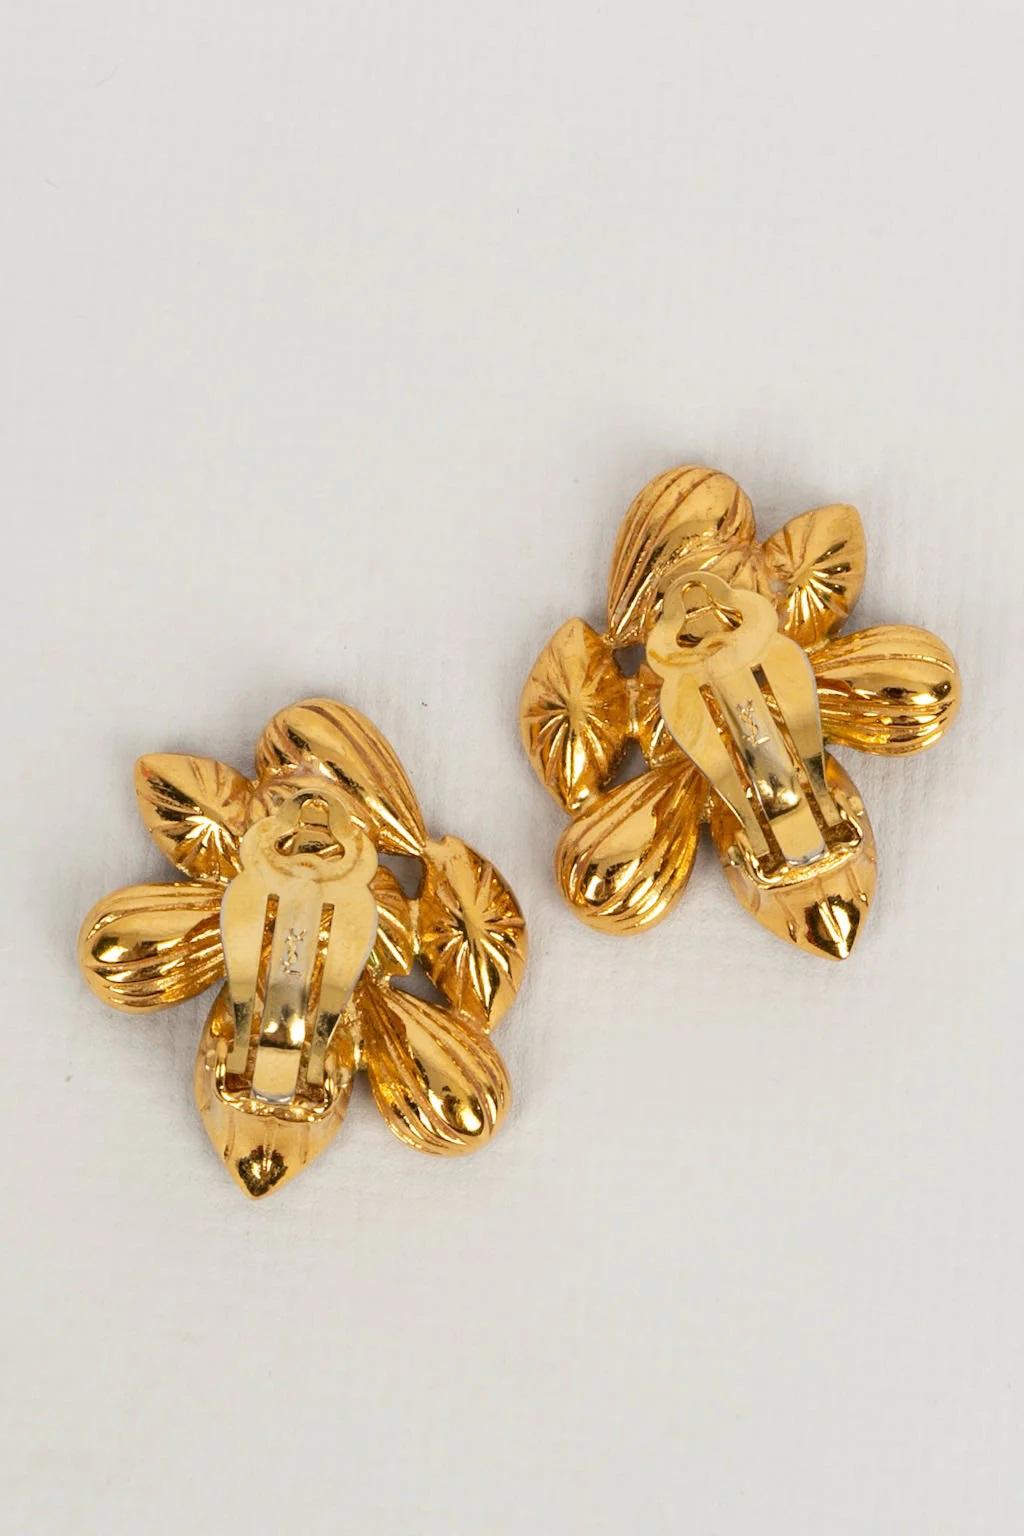 Yves Saint Laurent - Gold metal clip earrings paved with blue rhinestones.

Additional information:
Dimensions: 2.5 W x 3 H cm
Condition: Very good condition
Seller Ref number: BO209